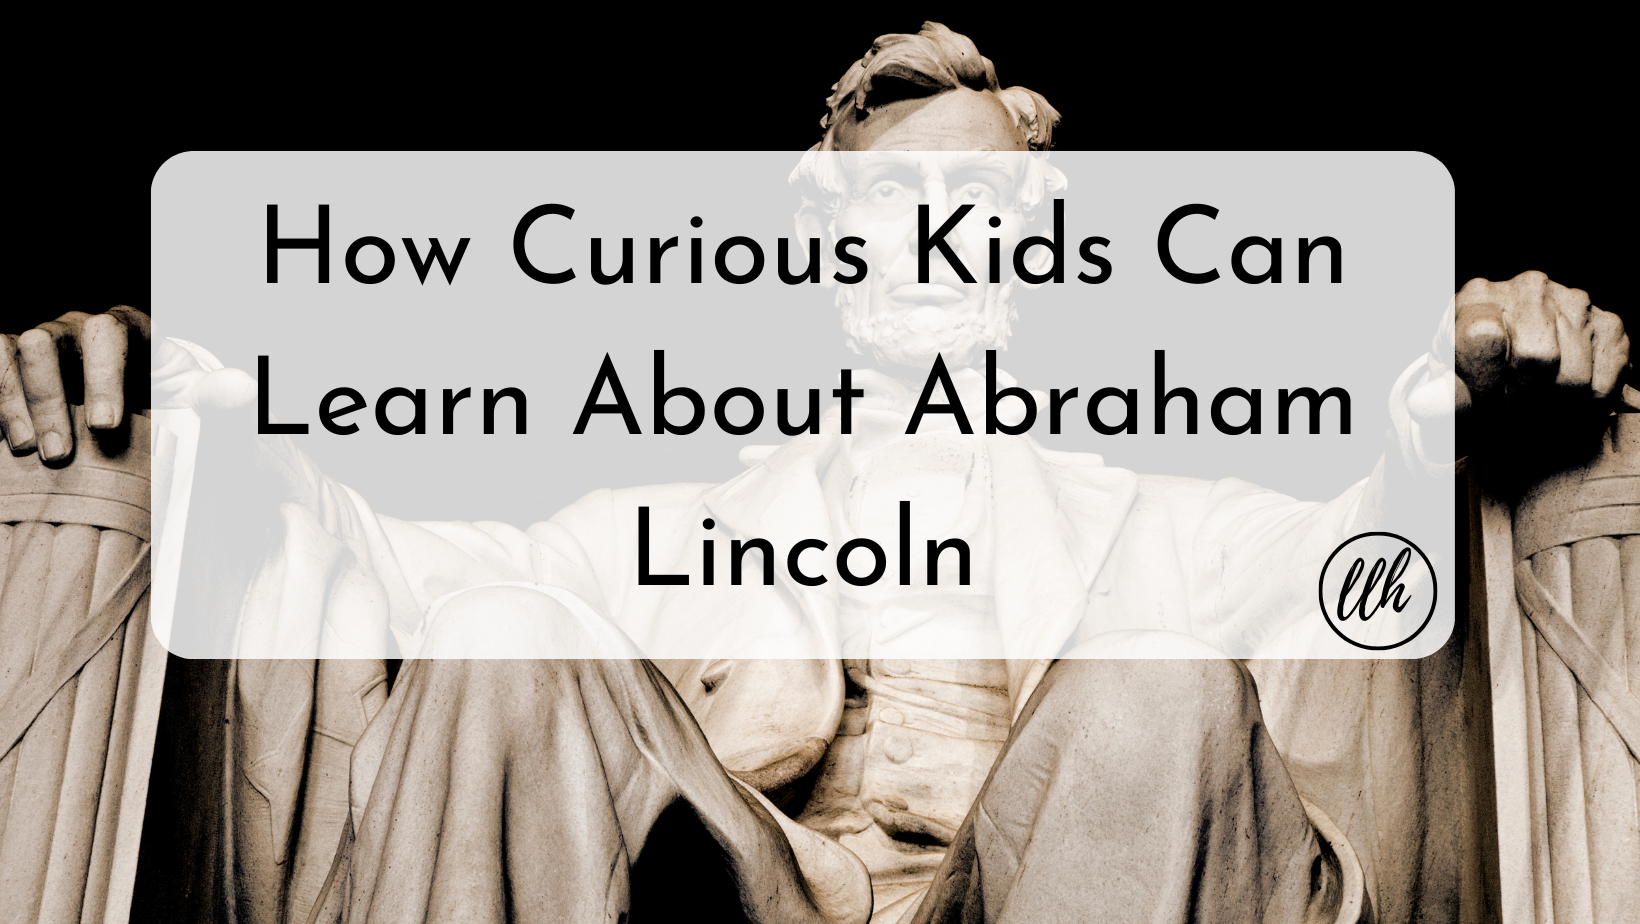 How Curious Kids Can Learn About Abraham Lincoln